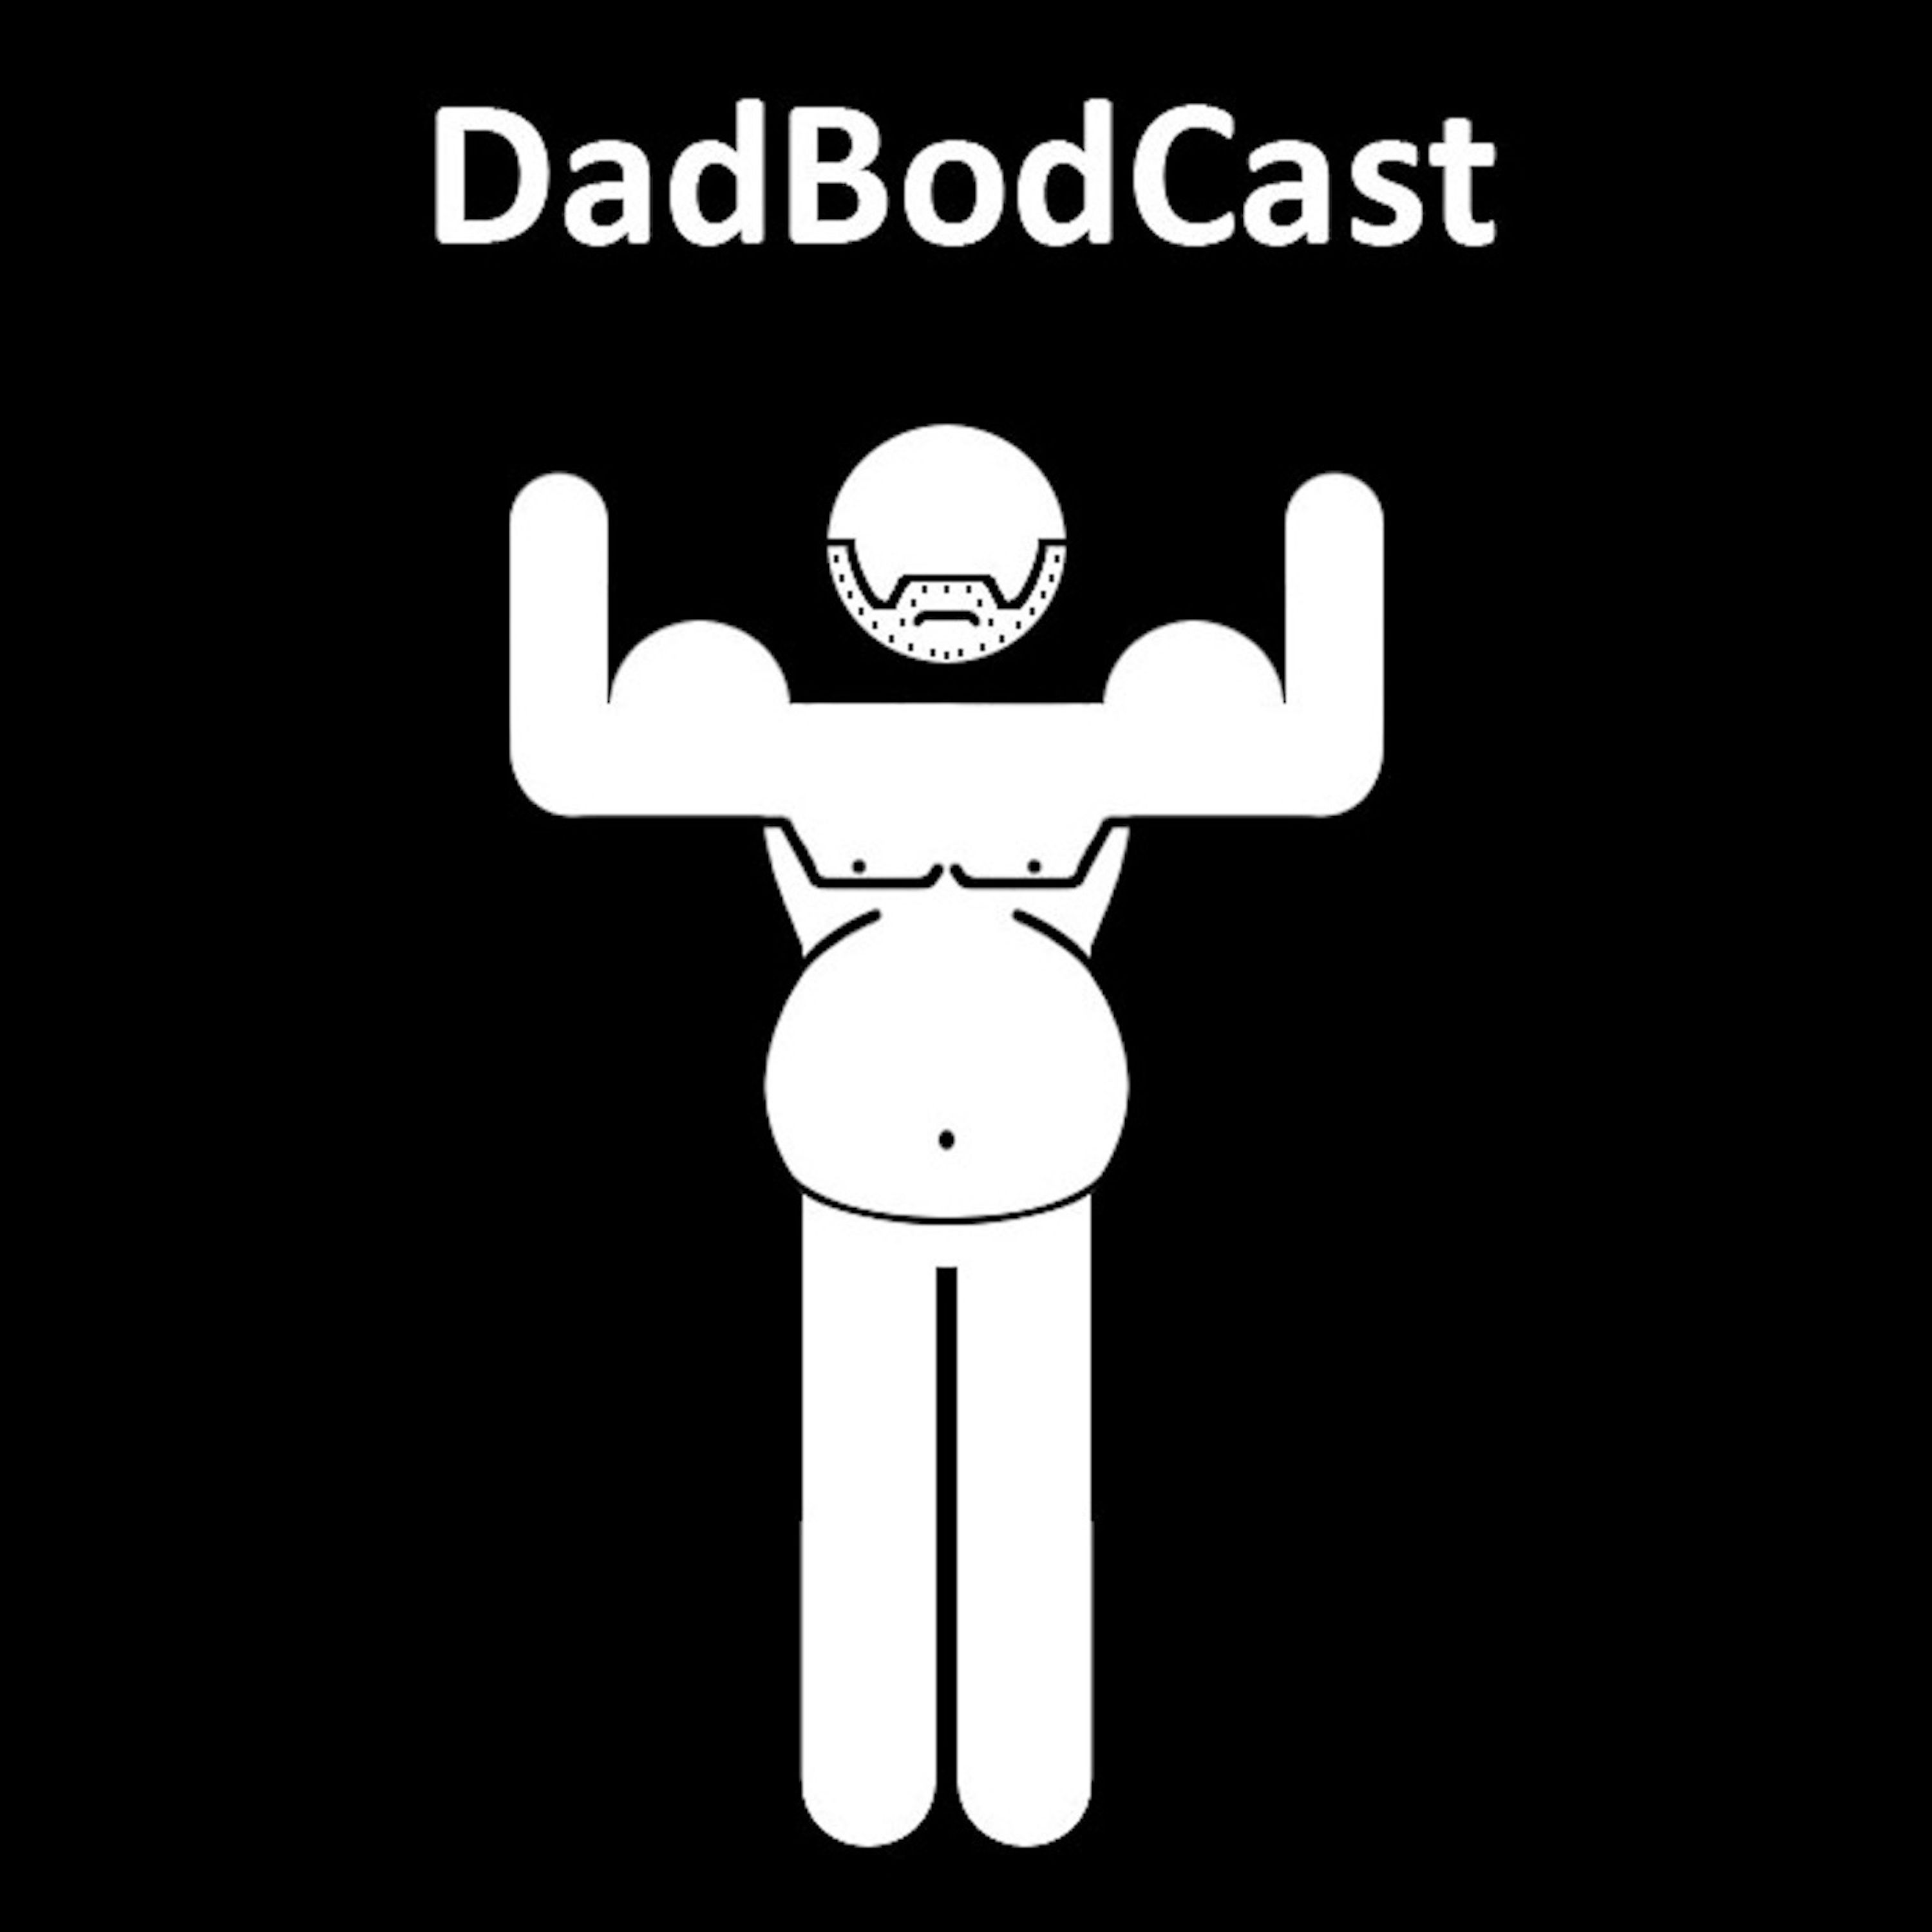 The First. The Original. The Best. DadBodCast